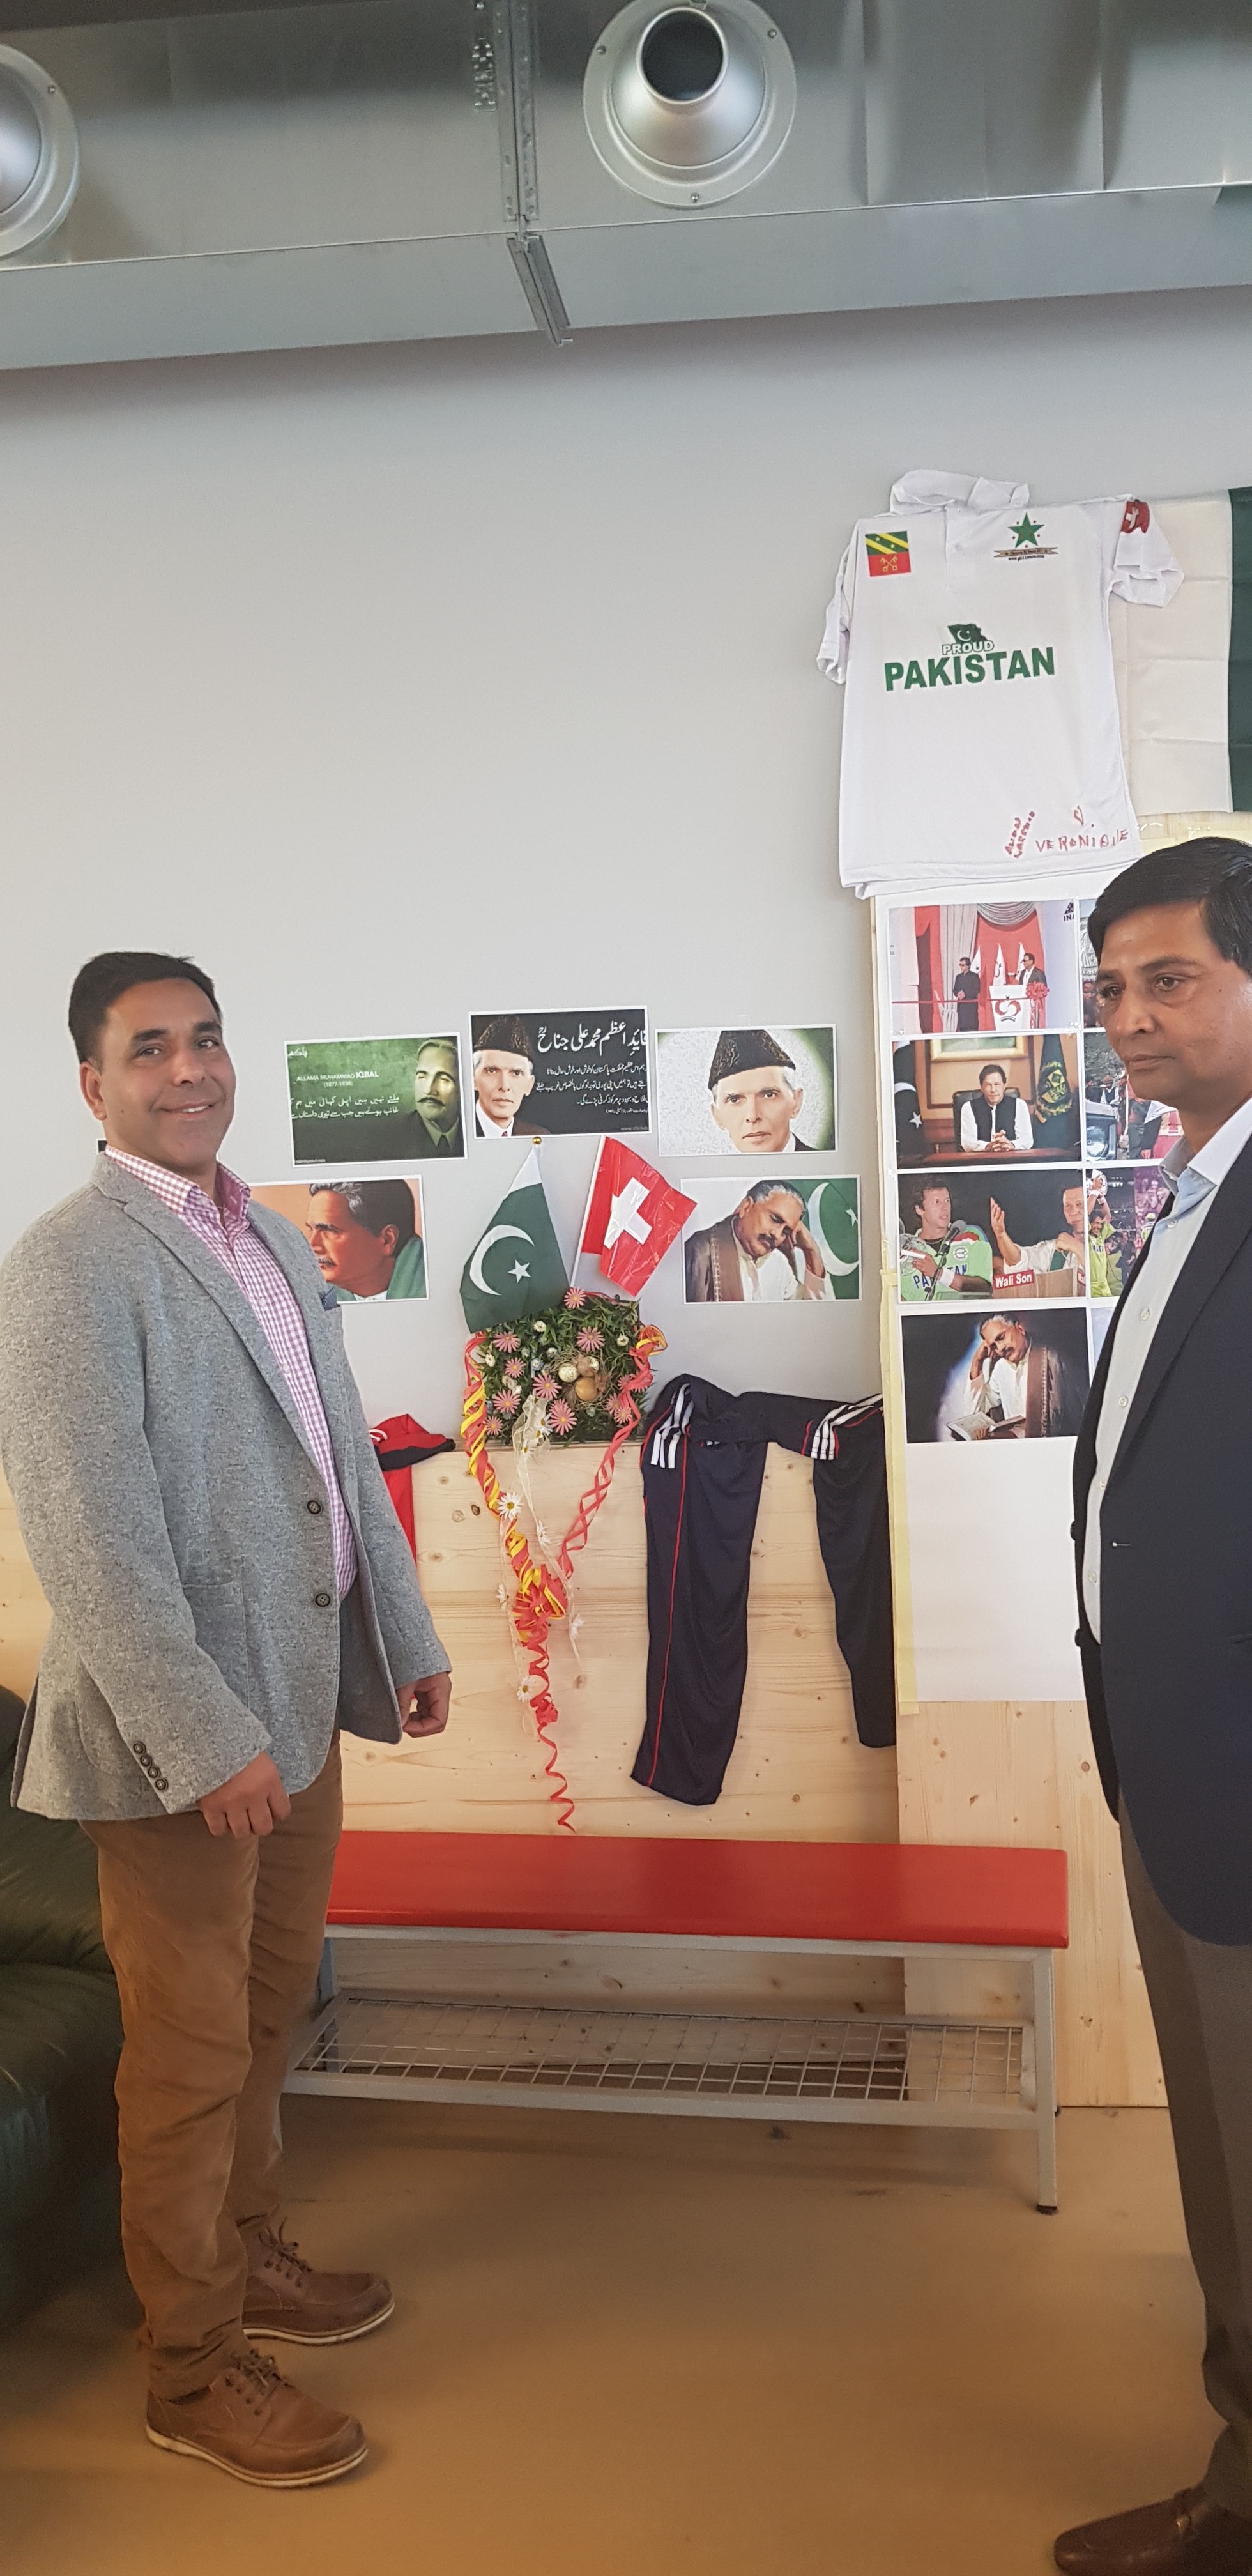 PSFF aims to uplift the soft image of Pakistan through sports and cultural, Says Raja Hafeez